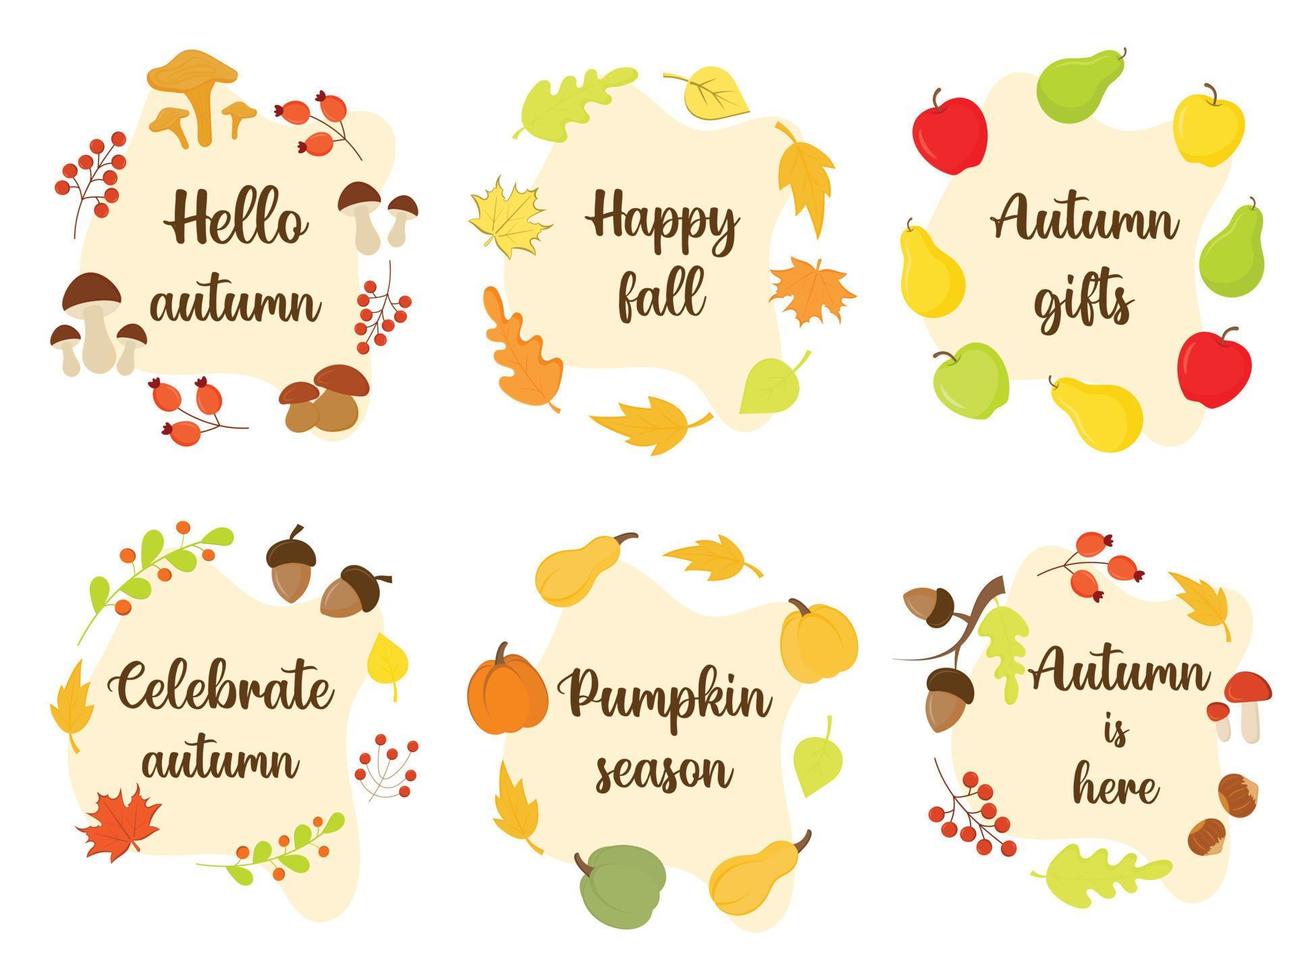 Bundle of seasonal vector autumn frames with hand drawn lettering. Autumn phrases with cute and cozy design elements pumpkins, mushrooms, apples, plants, leaves, berries. Trendy fall designs.